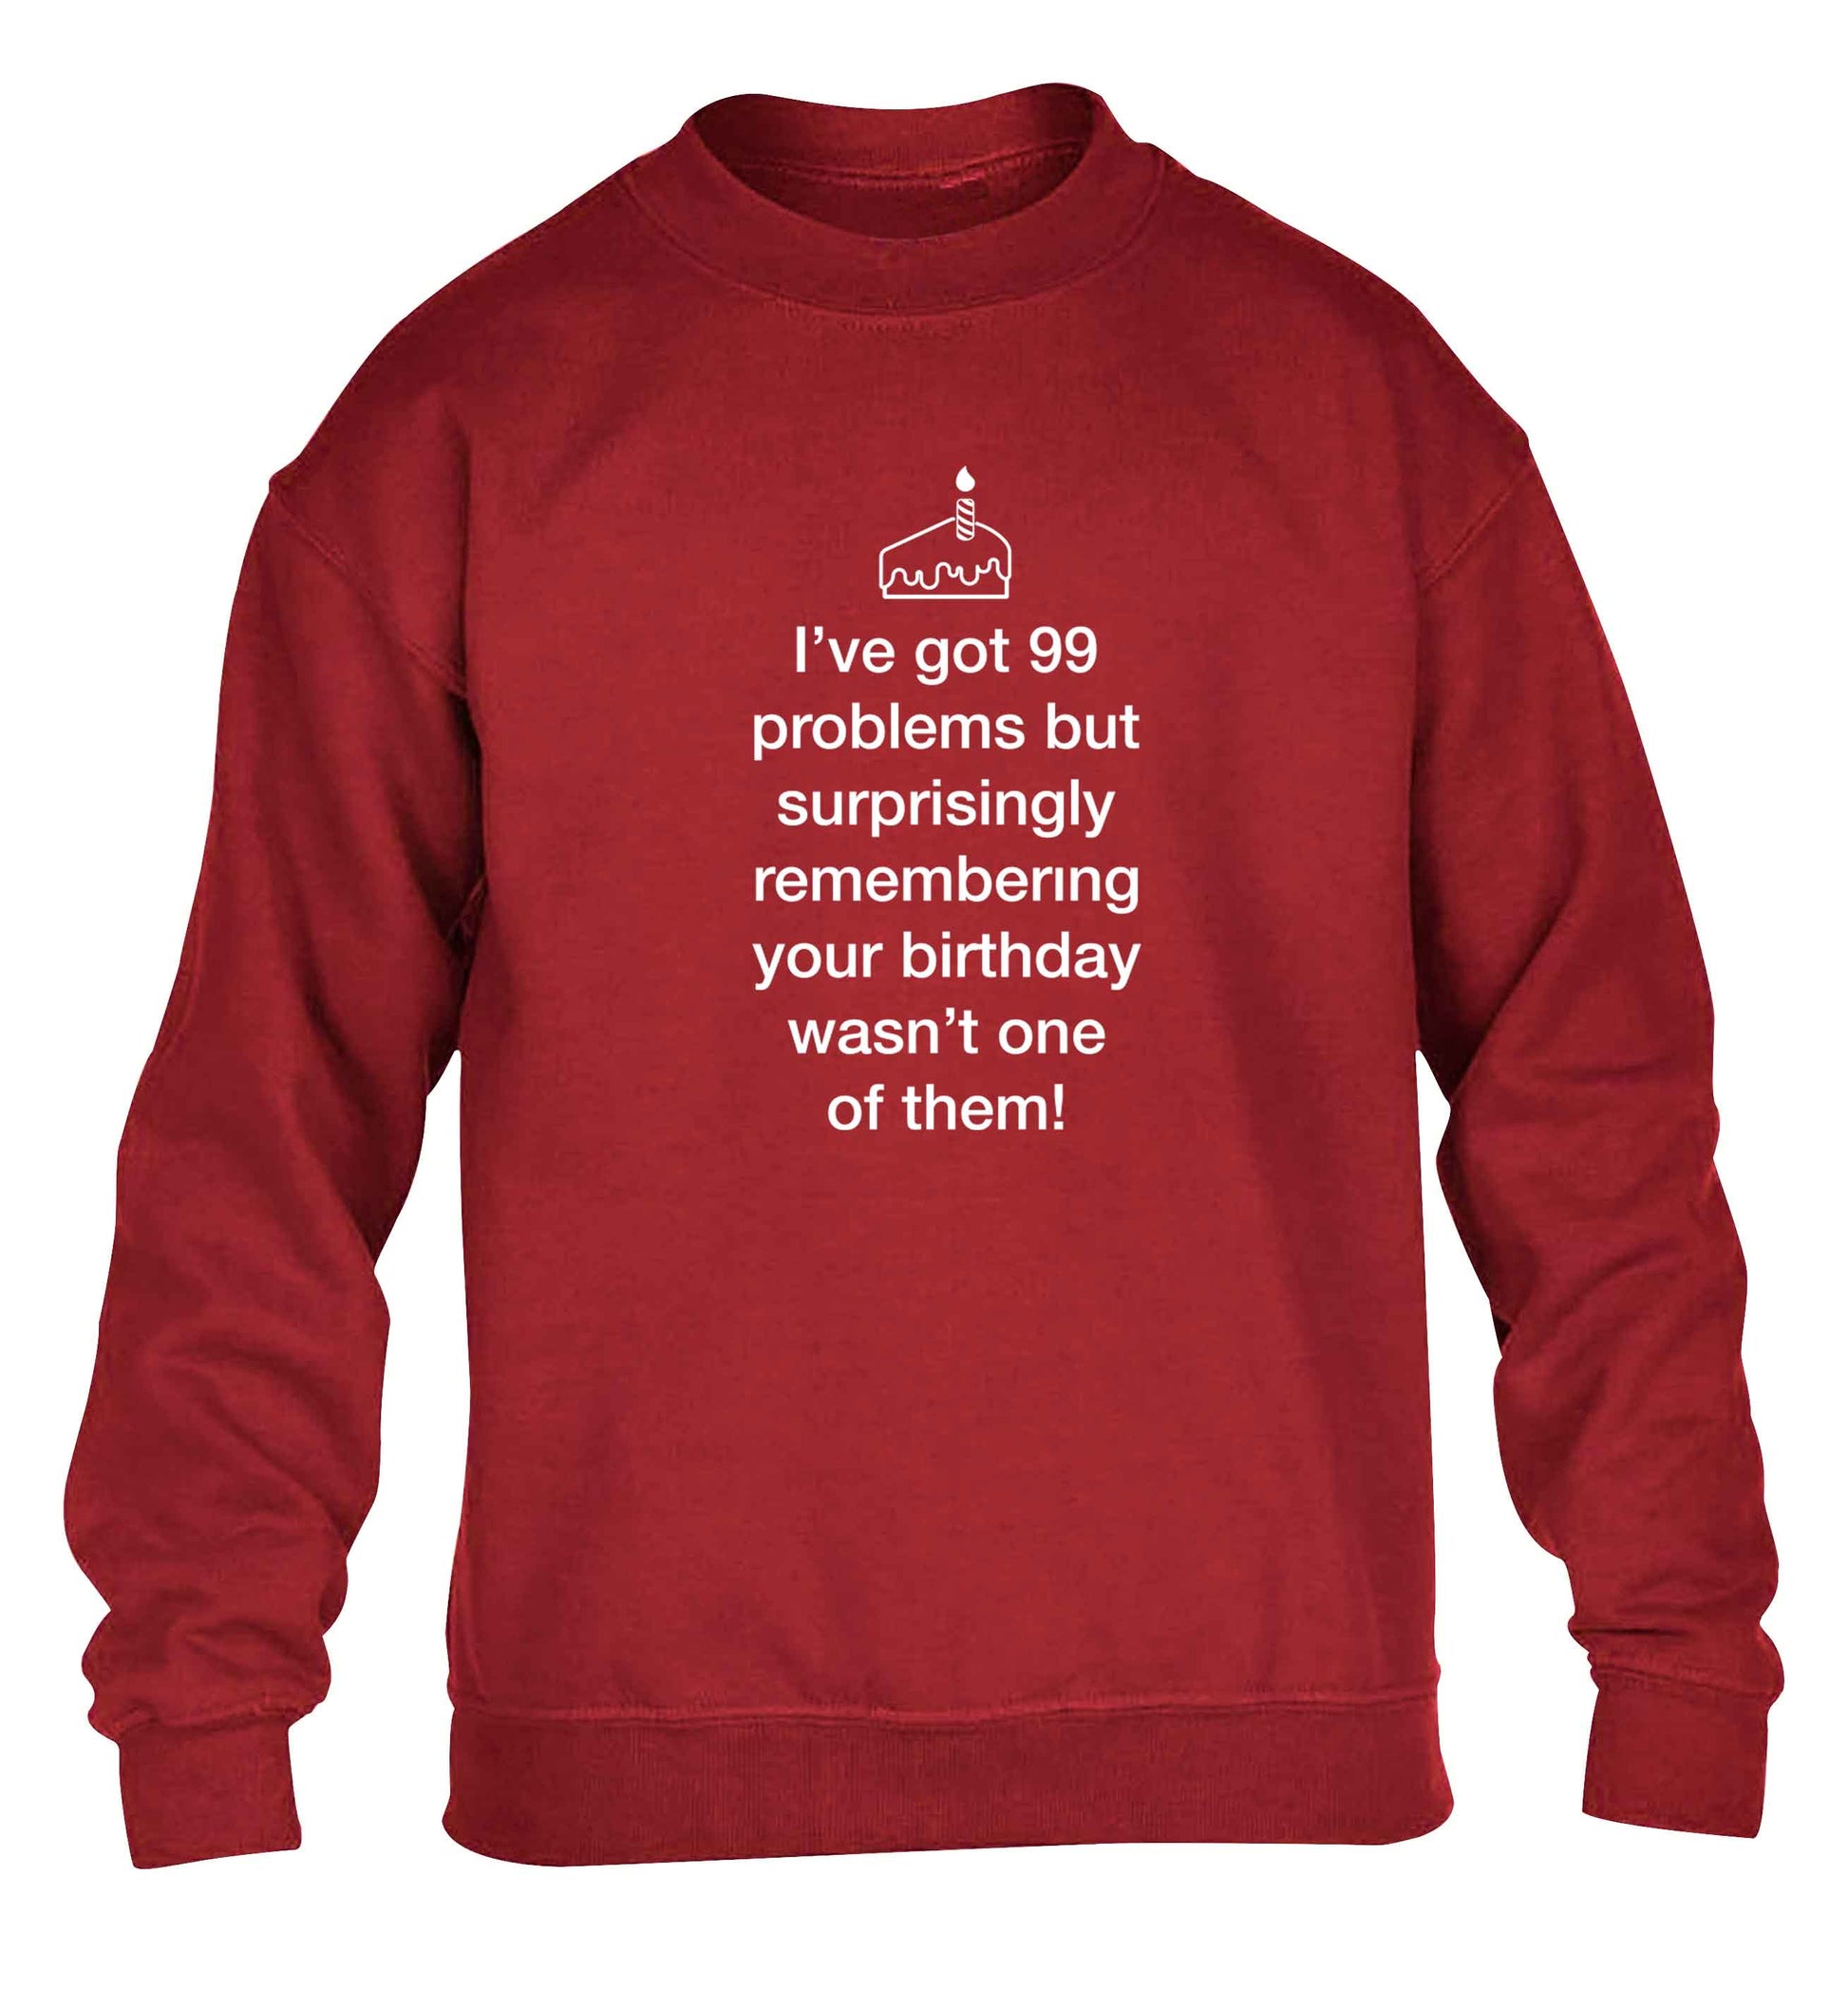 I've got 99 problems but surprisingly remembering your birthday wasn't one of them! children's grey sweater 12-13 Years